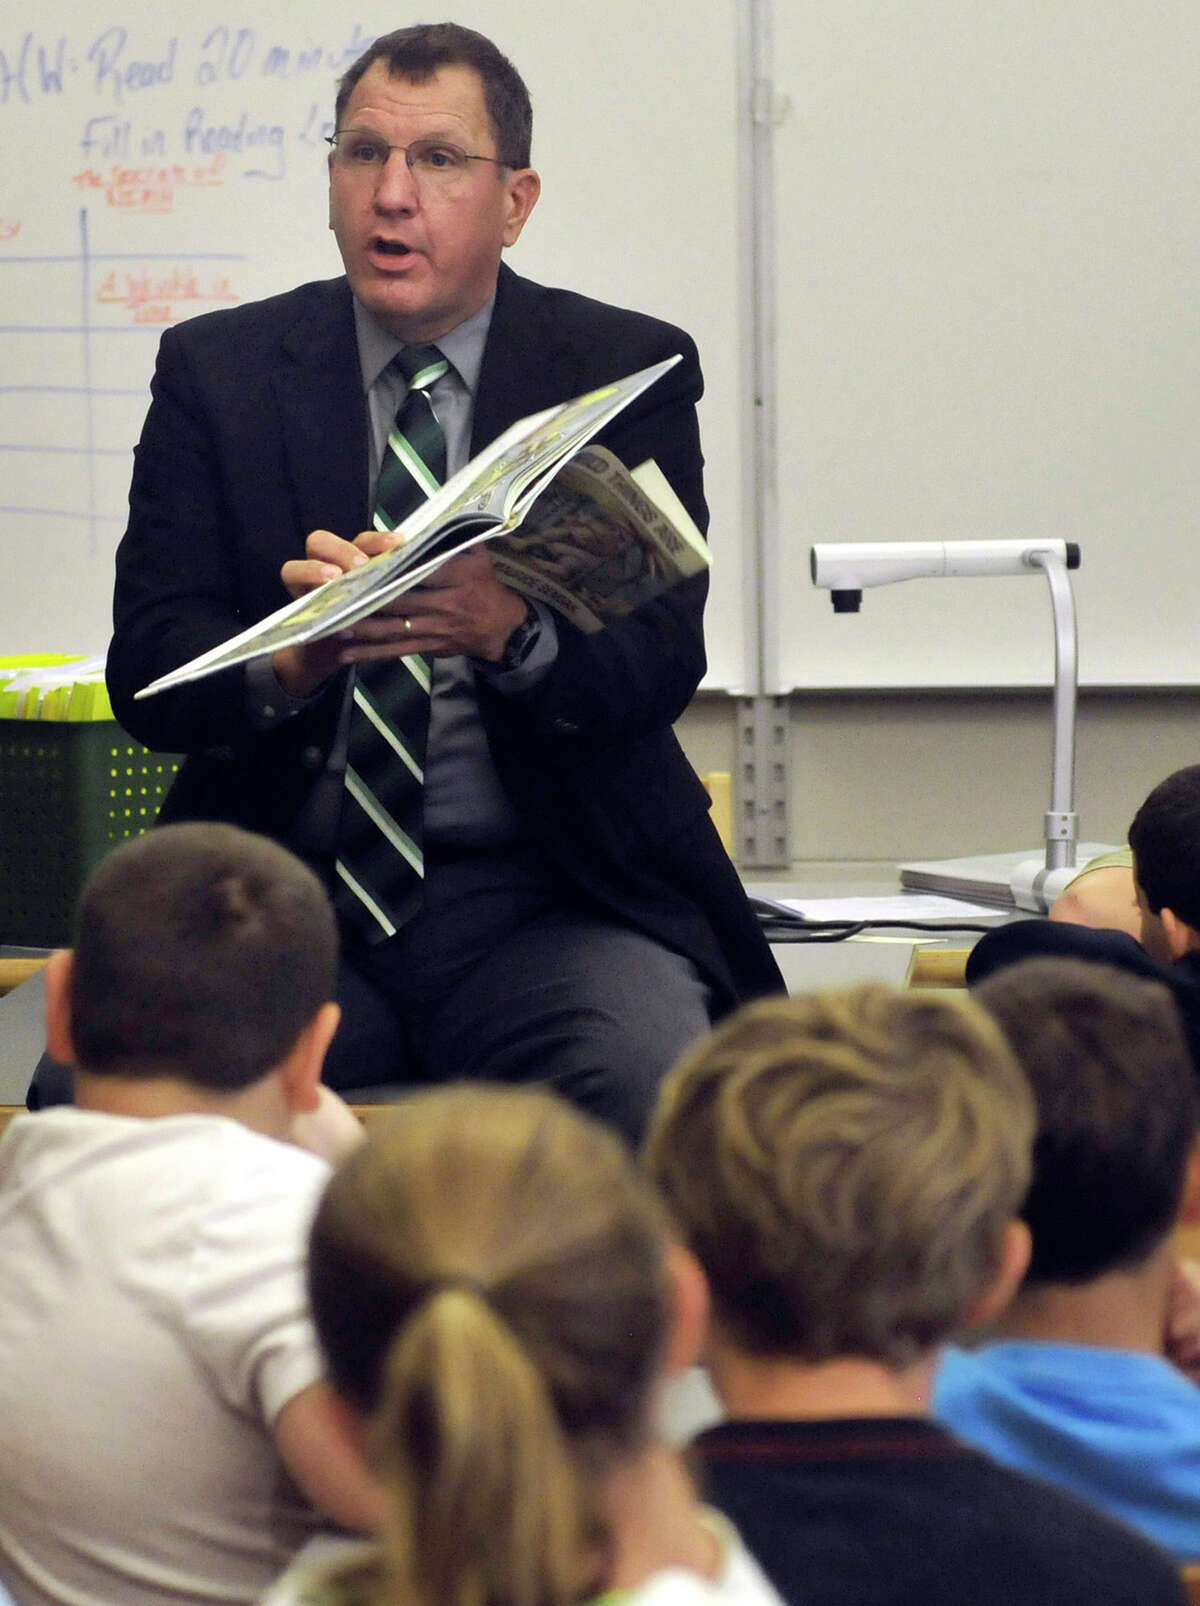 Tuscarora School District Superintendent Dr. Charles Prijatelj reads during International Literacy Day Monday, Sept. 8, 2014 at James Buchanan Middle School, in Mercersburg, Pa. (AP Photo/Public Opinion, Markell DeLoatch)